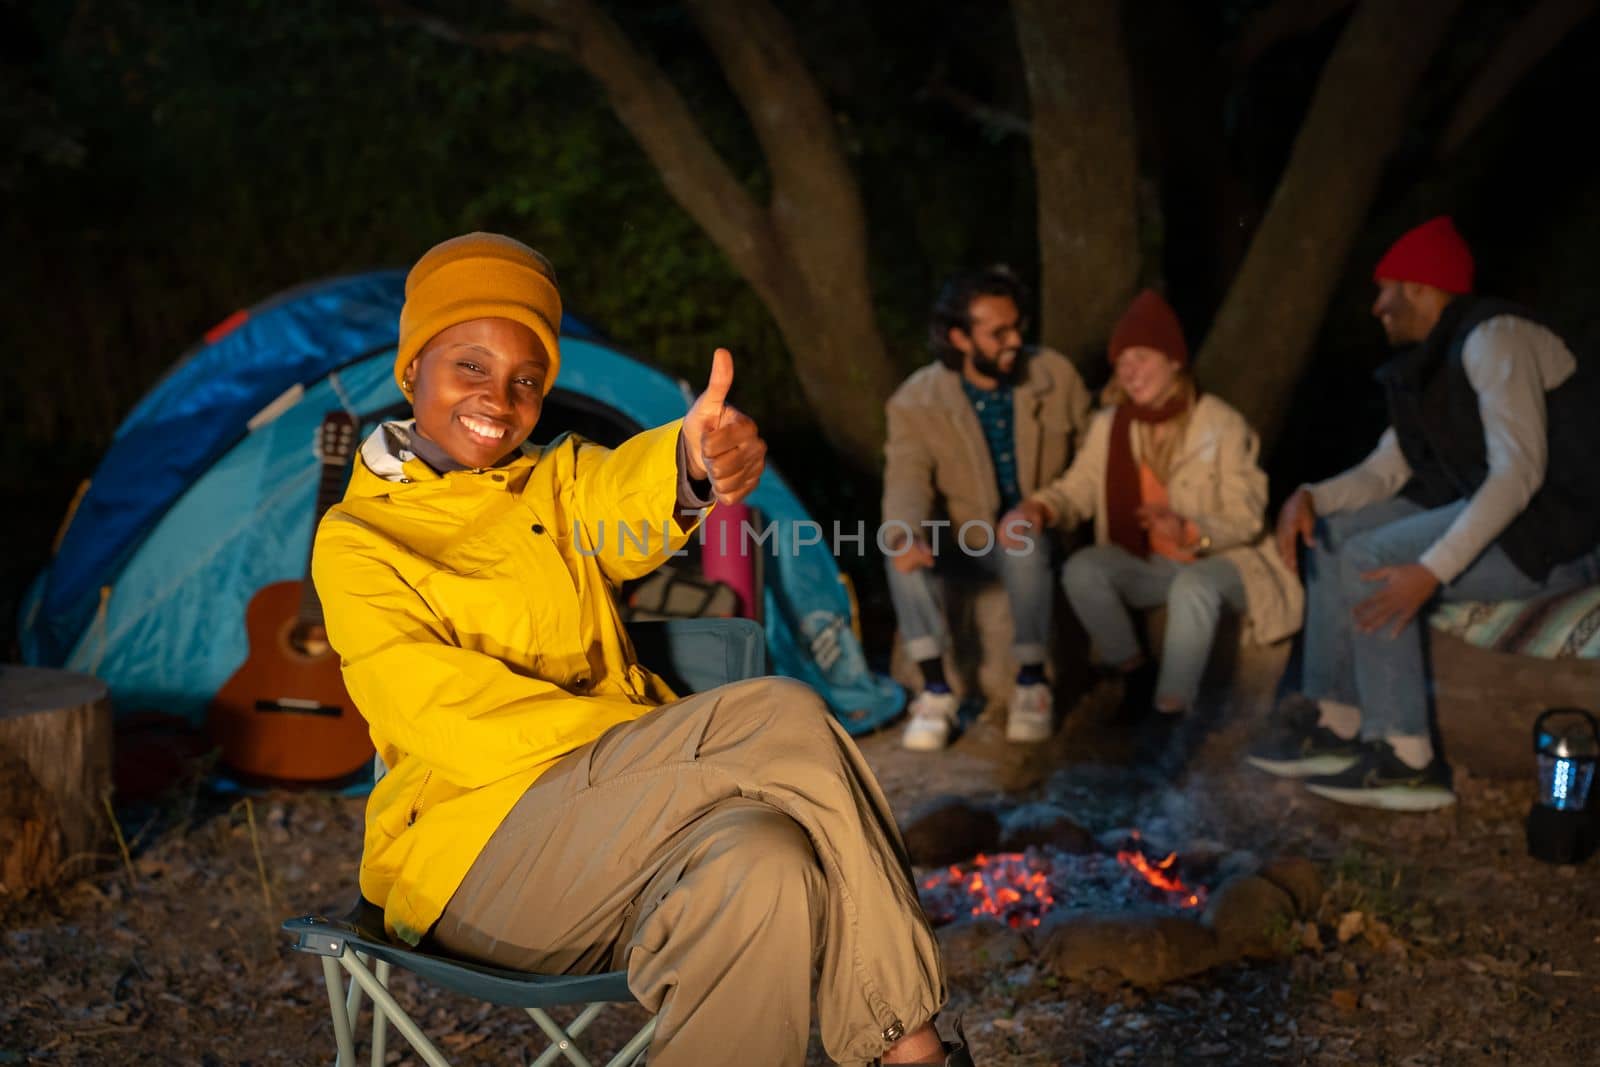 Group of friends with guitar near the bonfire and camping outdoors in the afternoon. Travel concept by PaulCarr